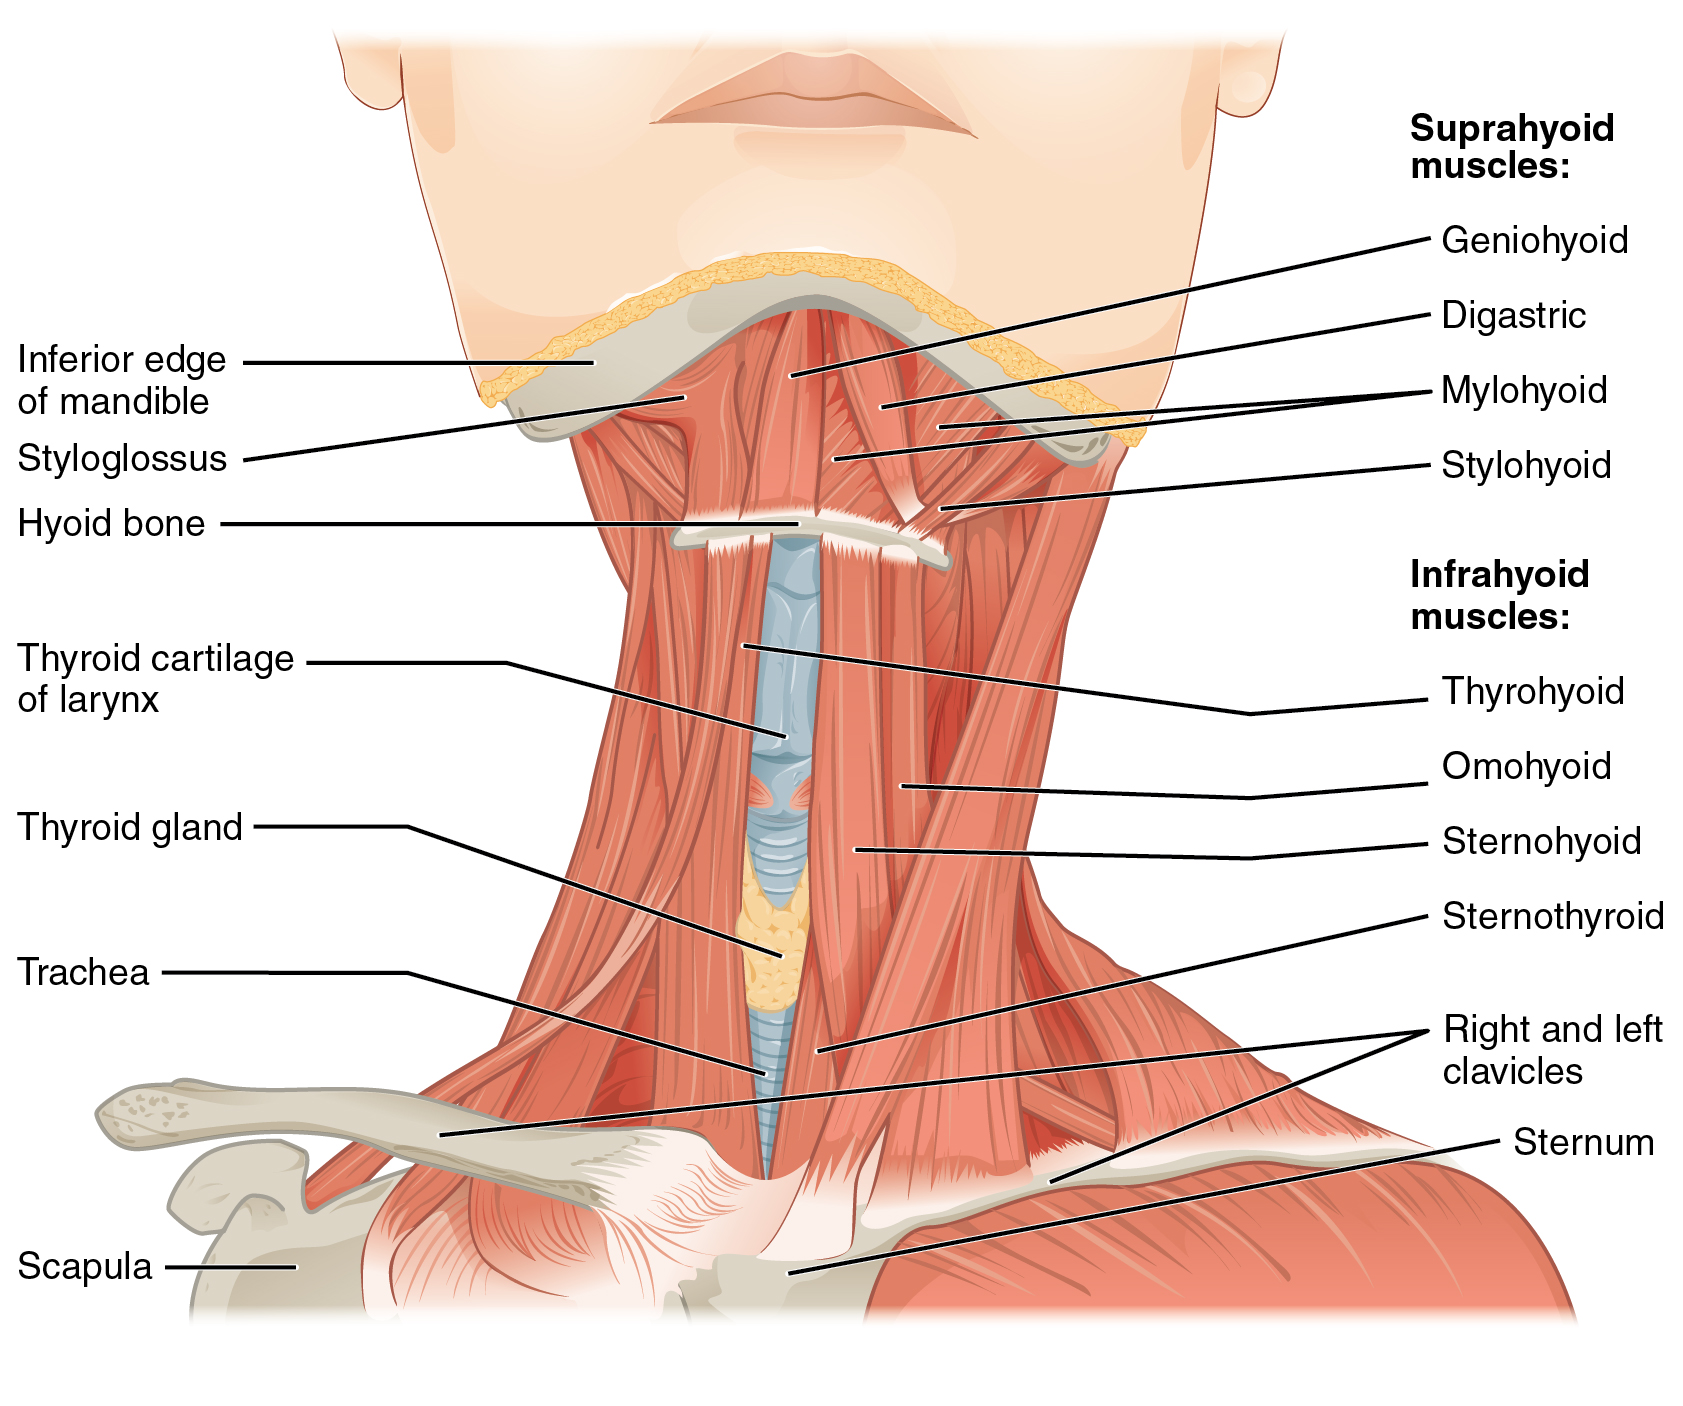 1110_Muscle_of_the_Anterior_Neck.jpg